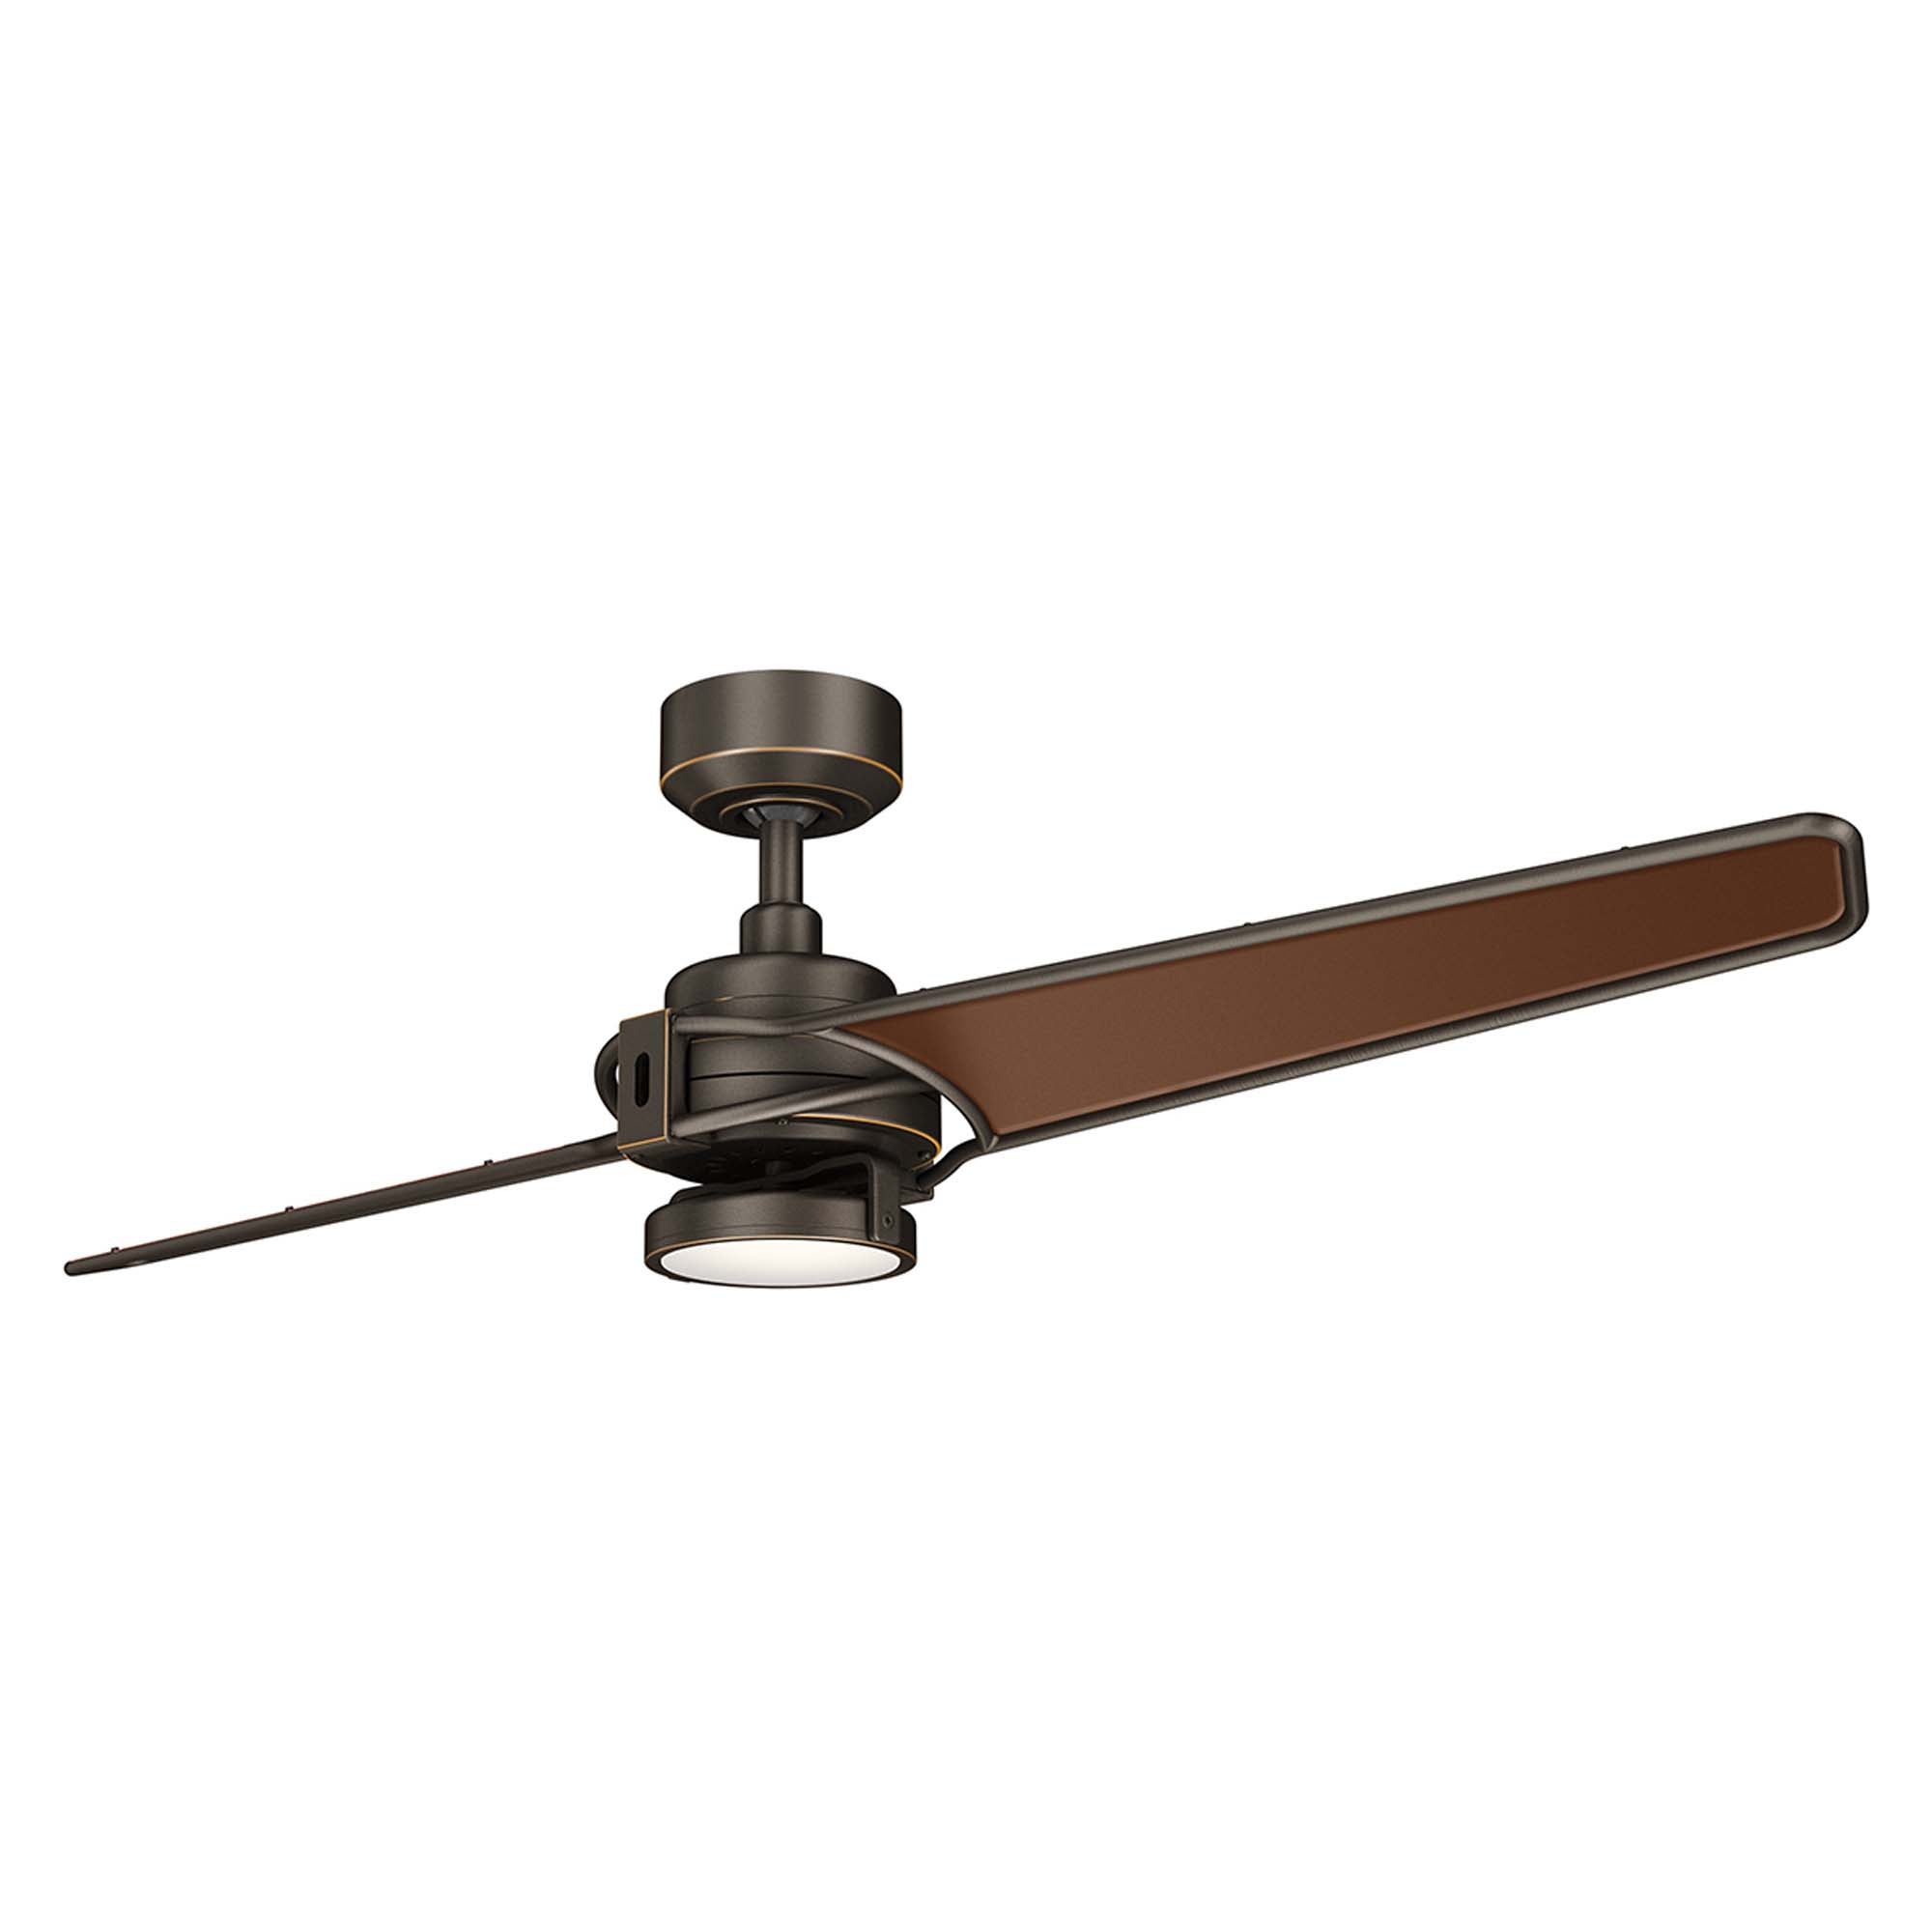 Kichler Xety Ceiling Fan With Light Remote 142cm Bronze